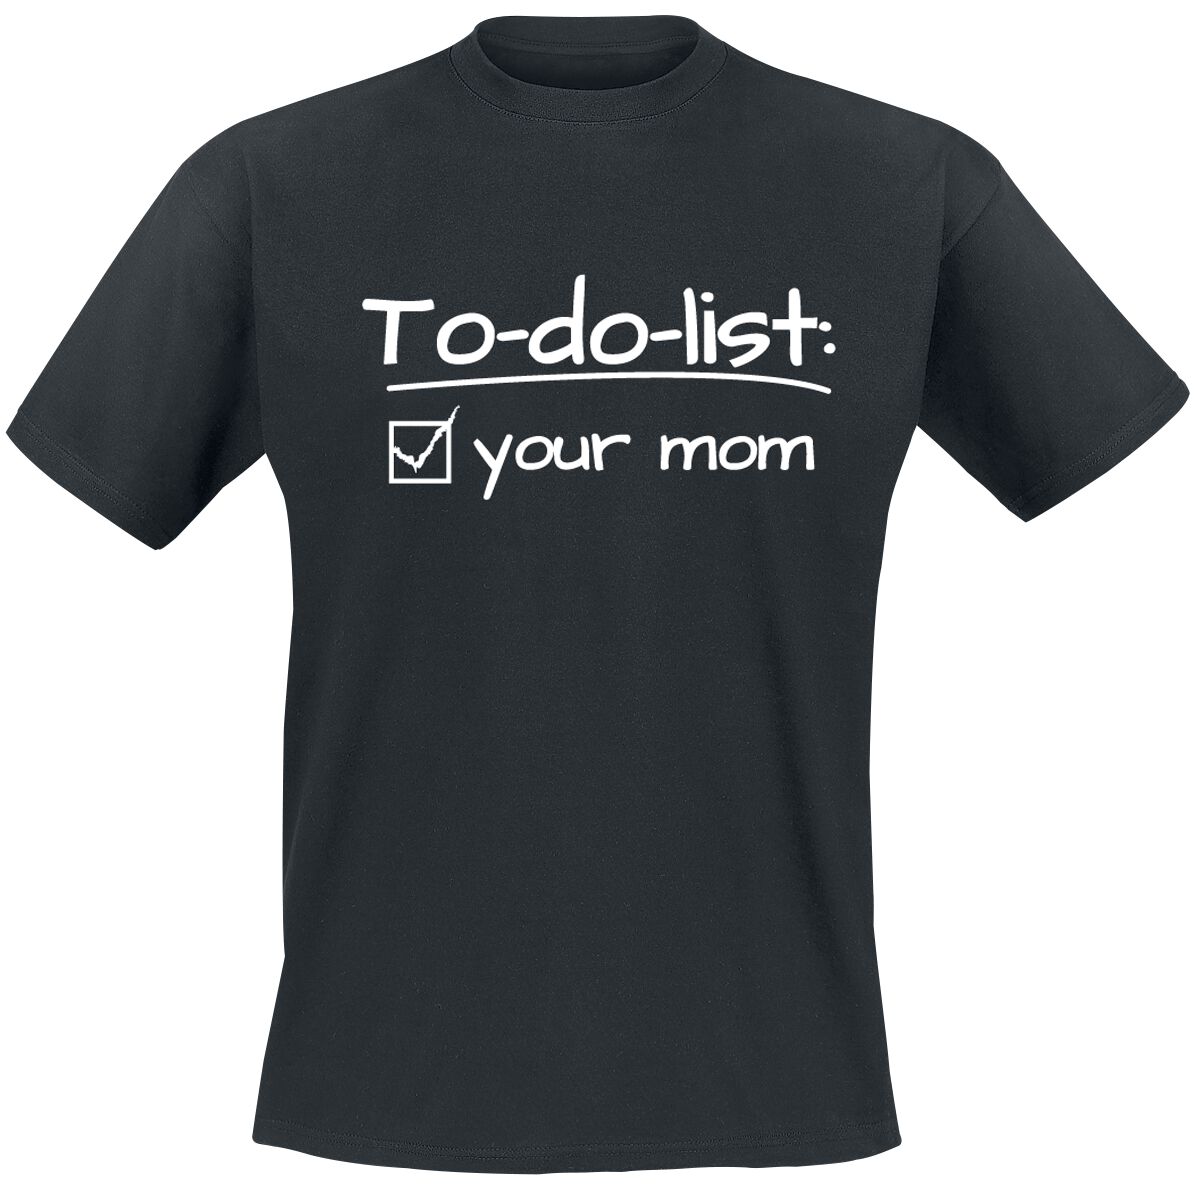 Slogans To Do List: Your Mom T-Shirt black